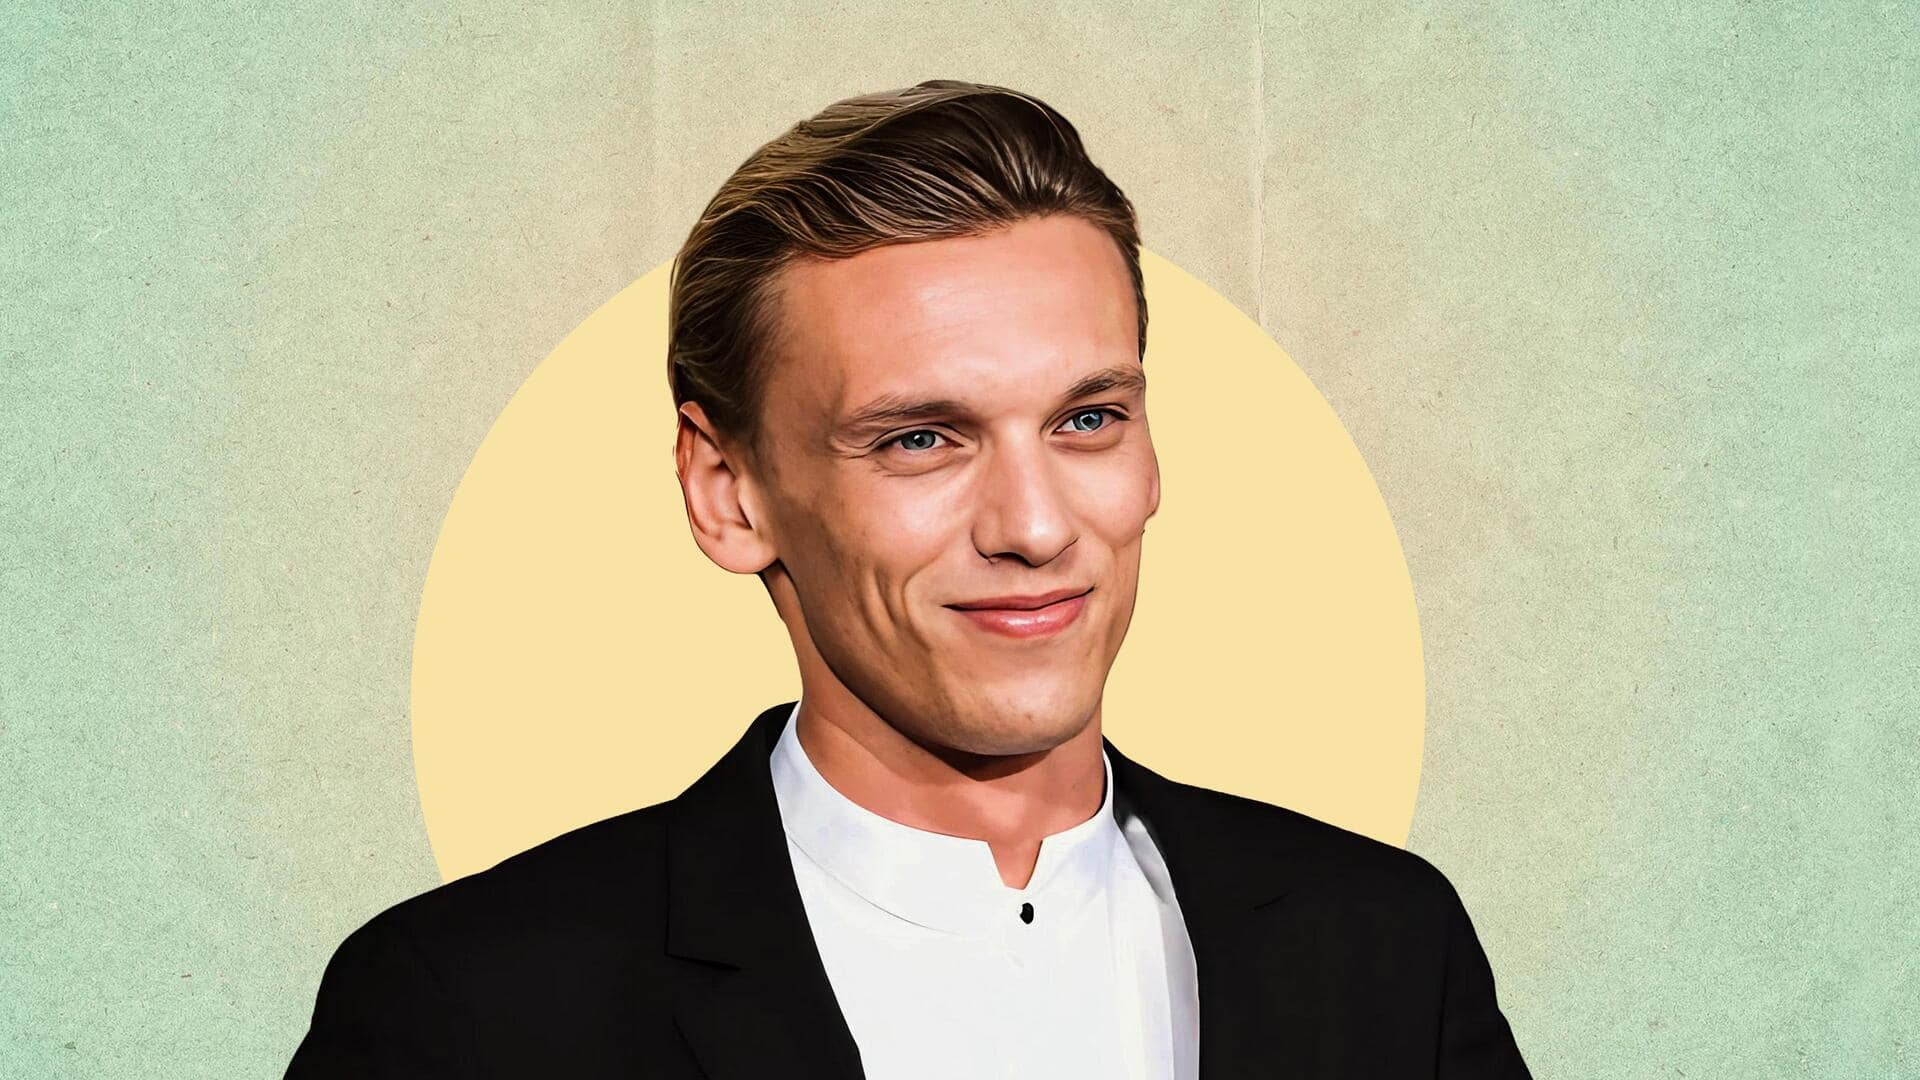 Explore Jamie Campbell Bower's iconic performances beyond 'Stranger Things'